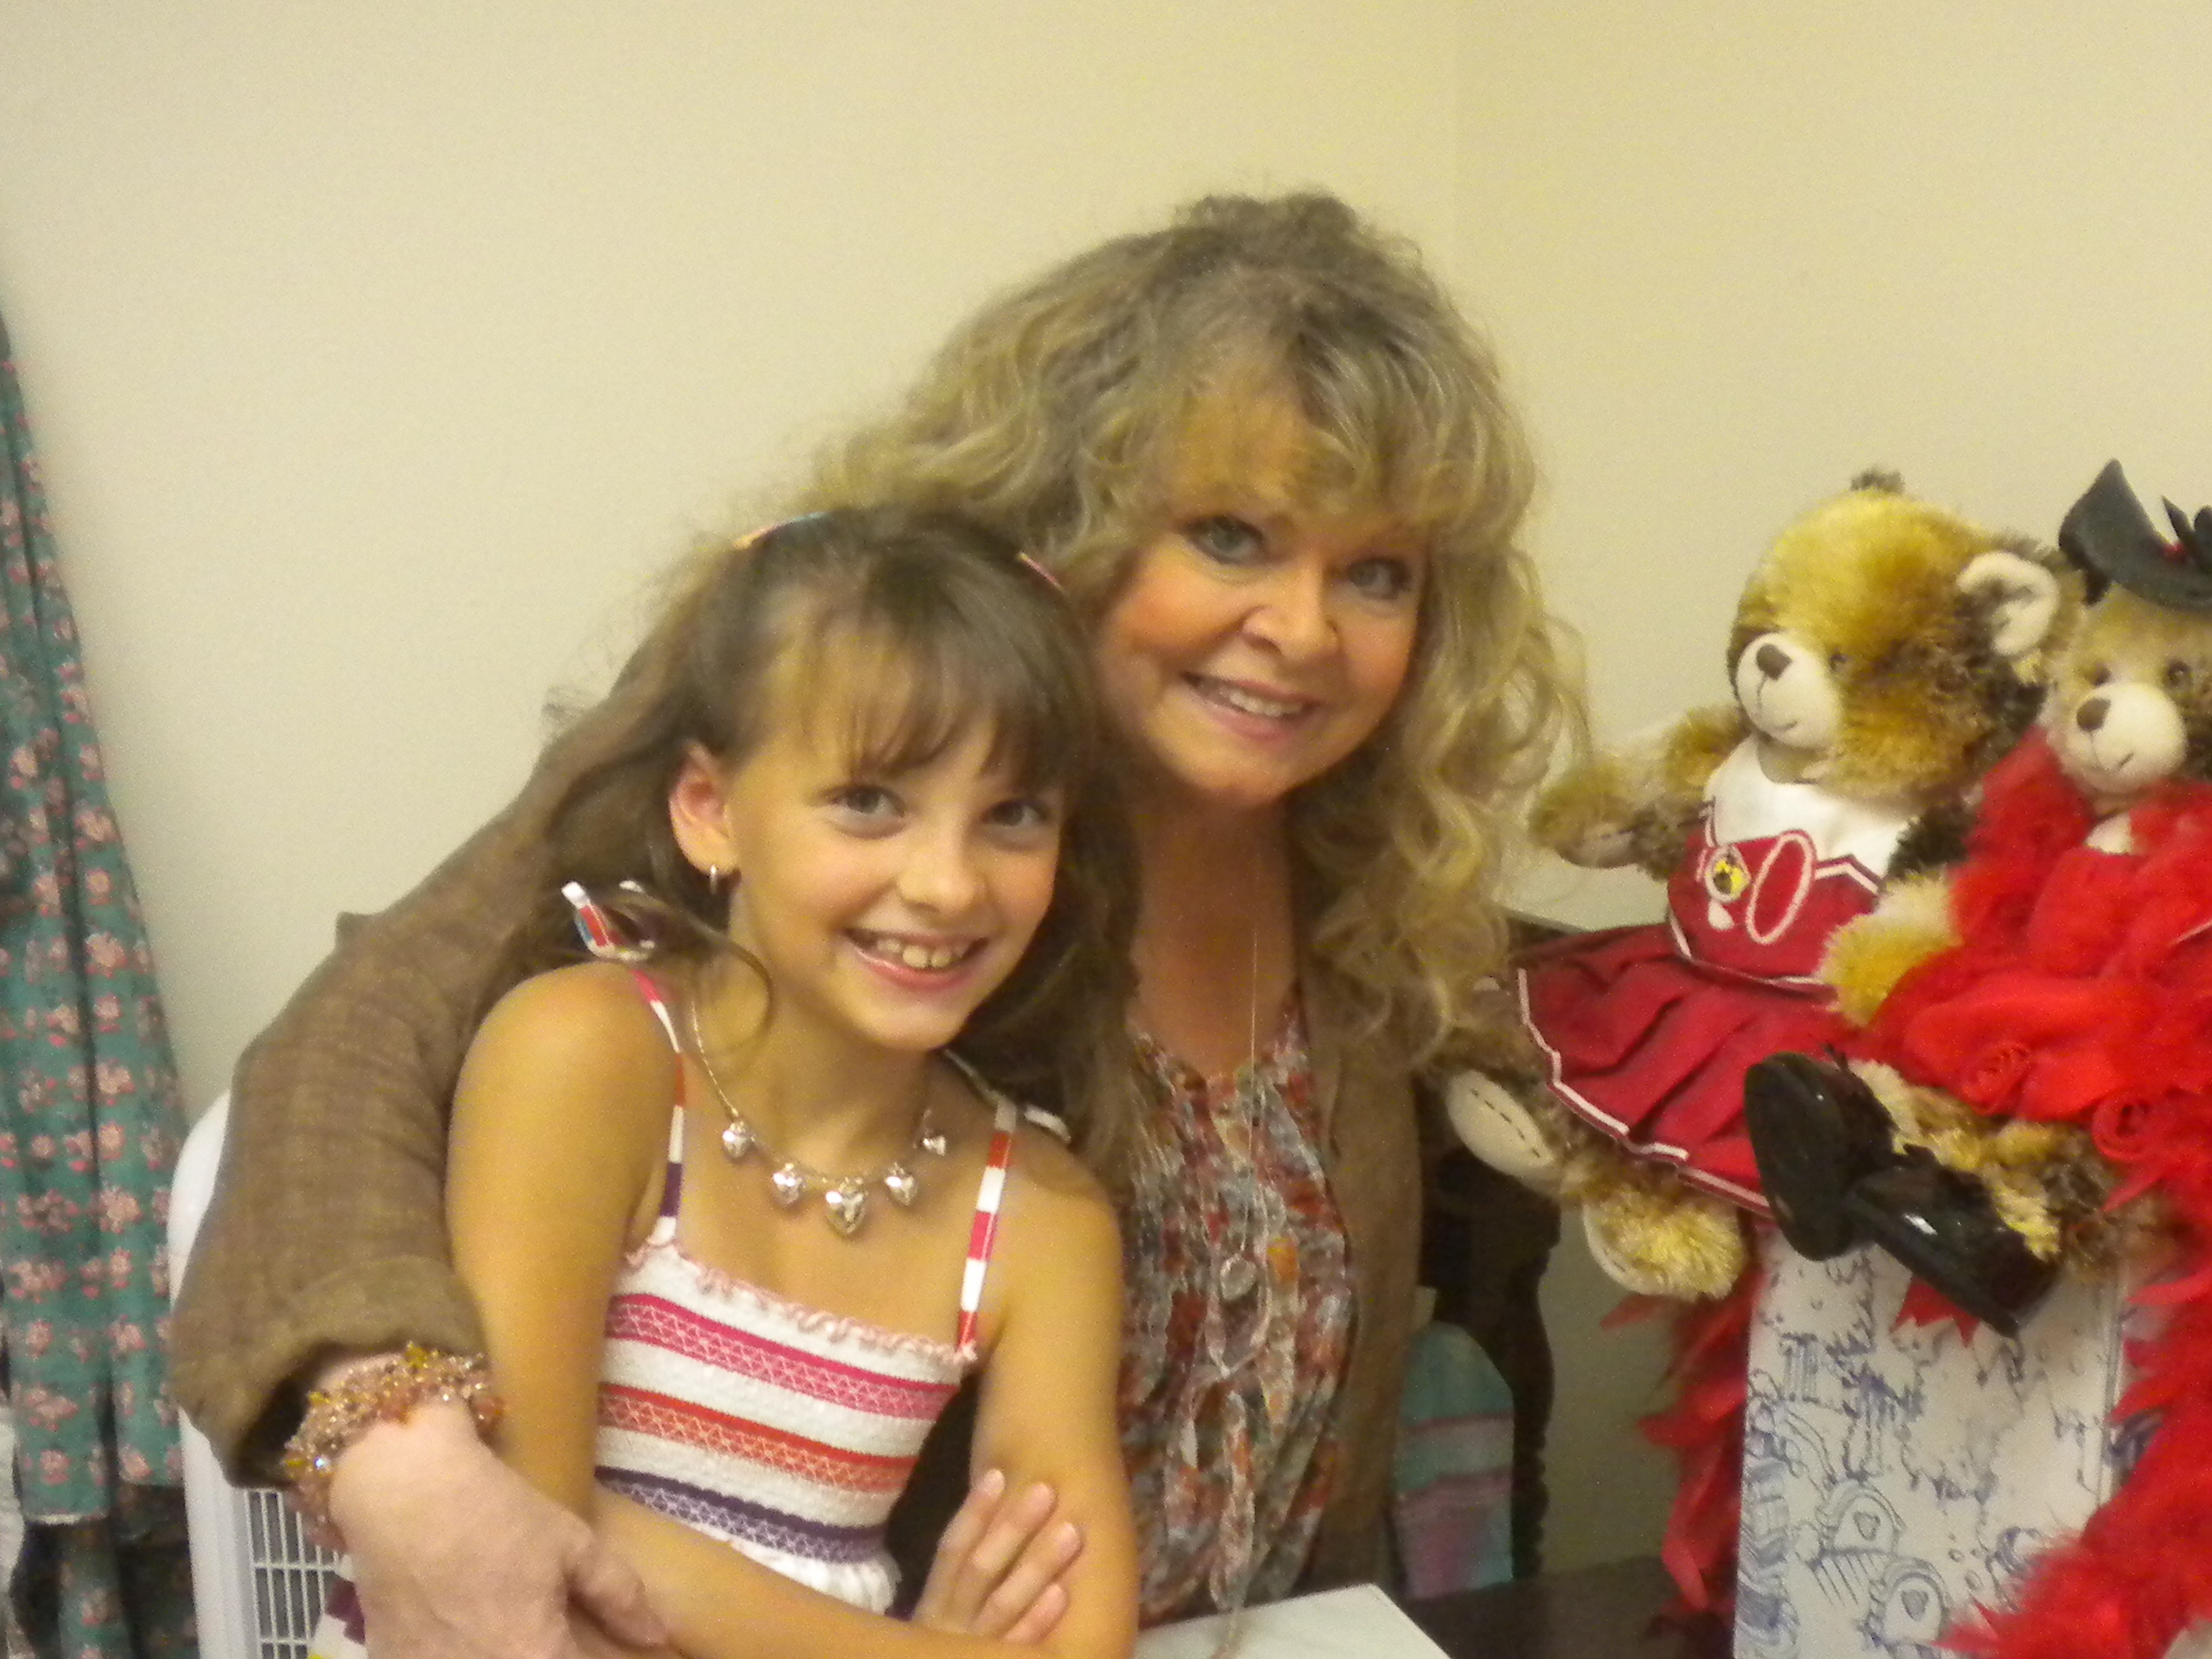 Rachel with Sally Struthers backstage at the Riverside Theater.